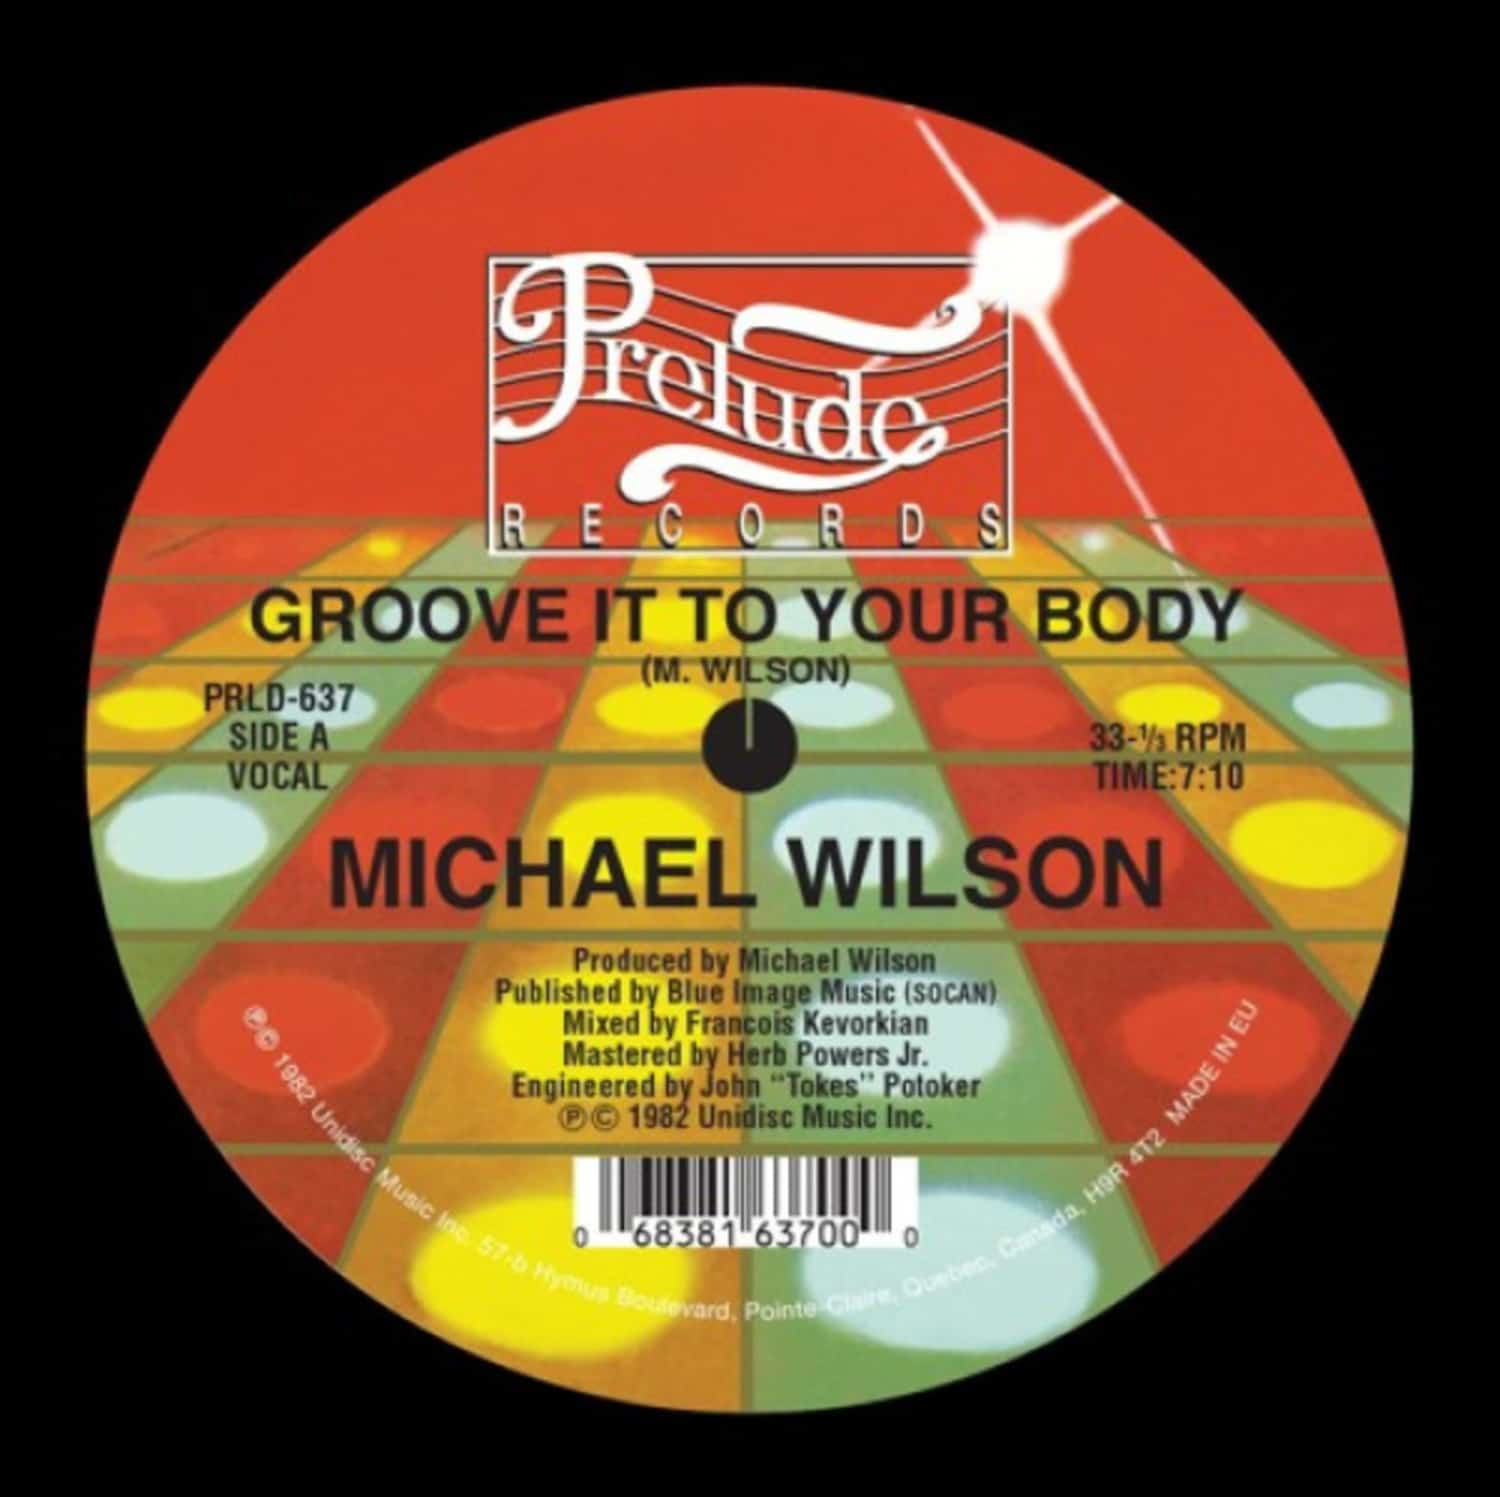 Michael Wilson - GROOVE IT TO YOUR BODY